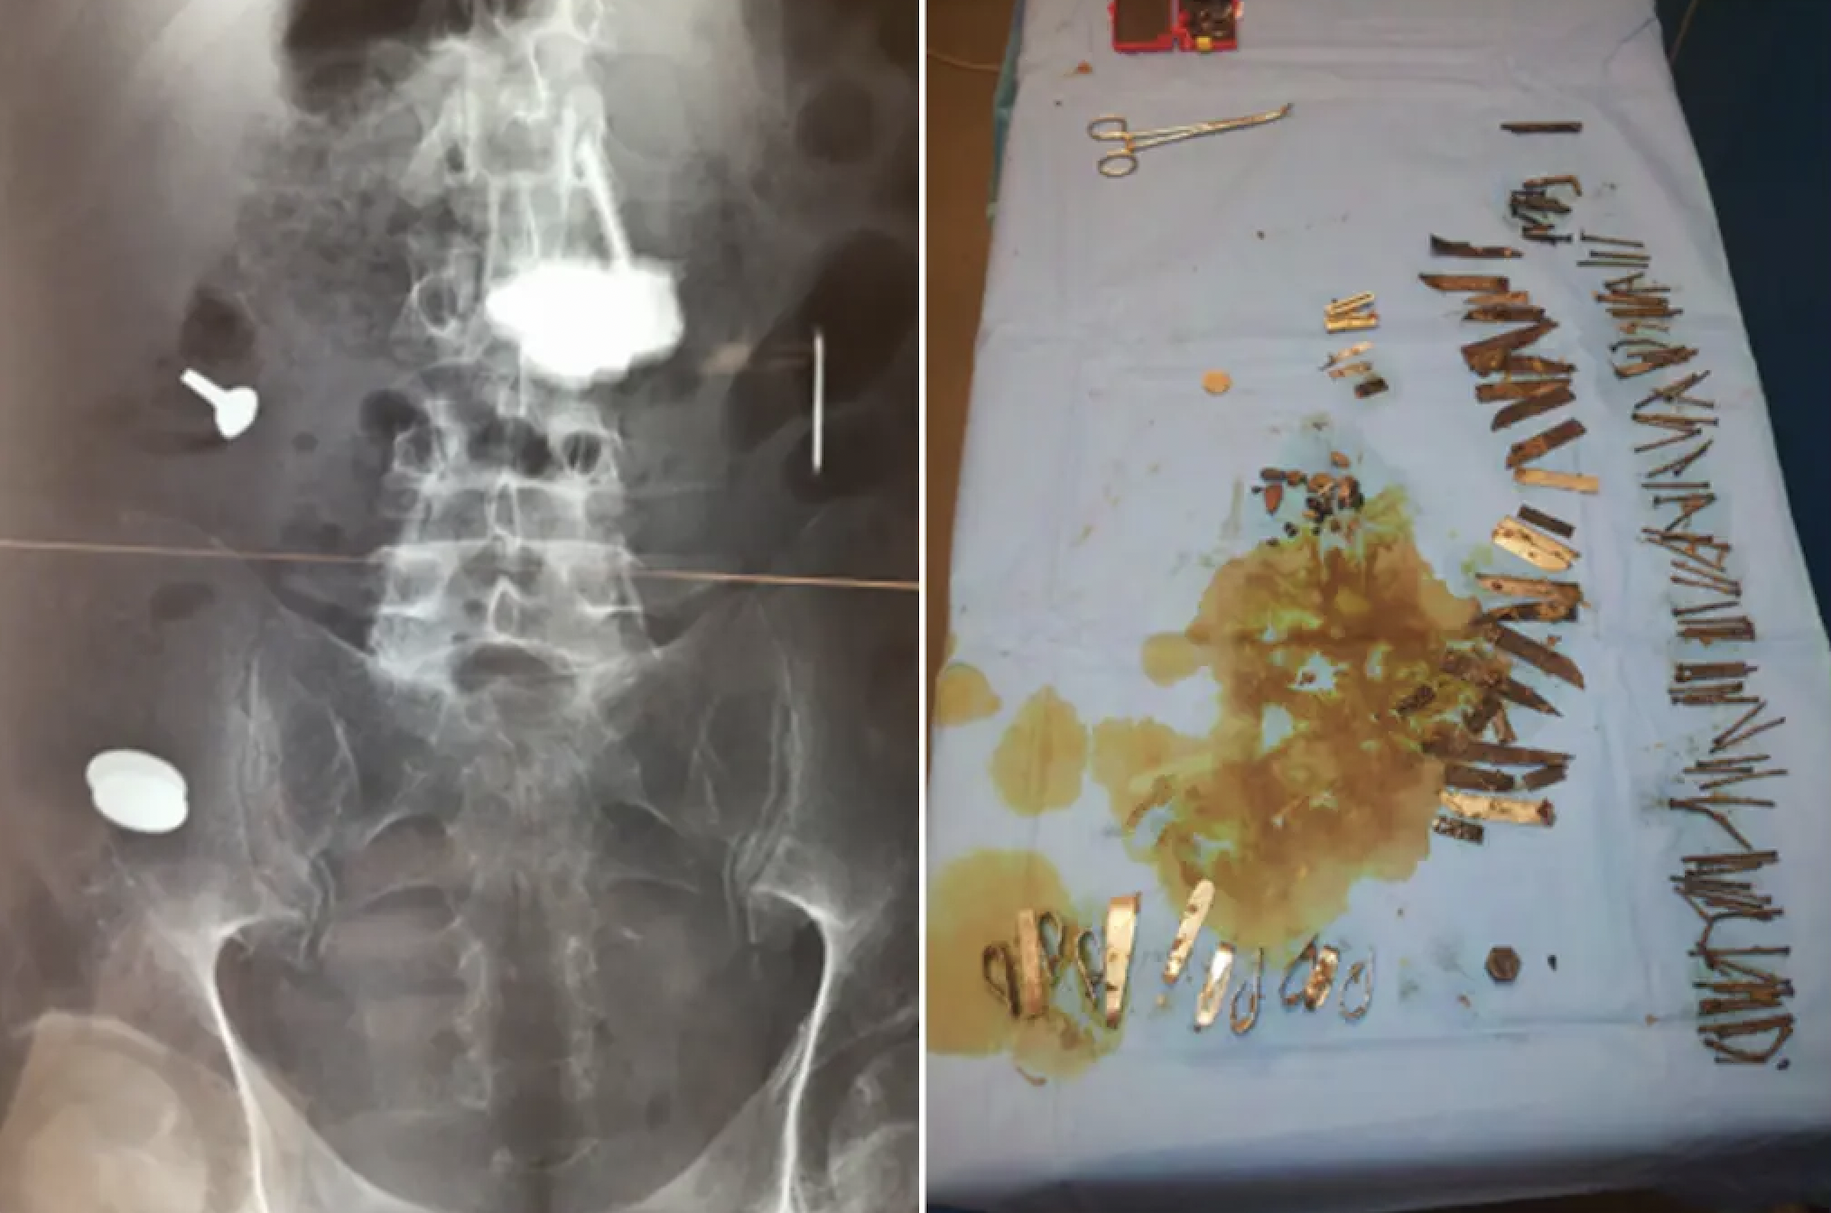 Surgeons remove nails, knives and screws from man’s stomach. He was suffering from chronic psychosis; a condition that manifests as a disconnection from reality.